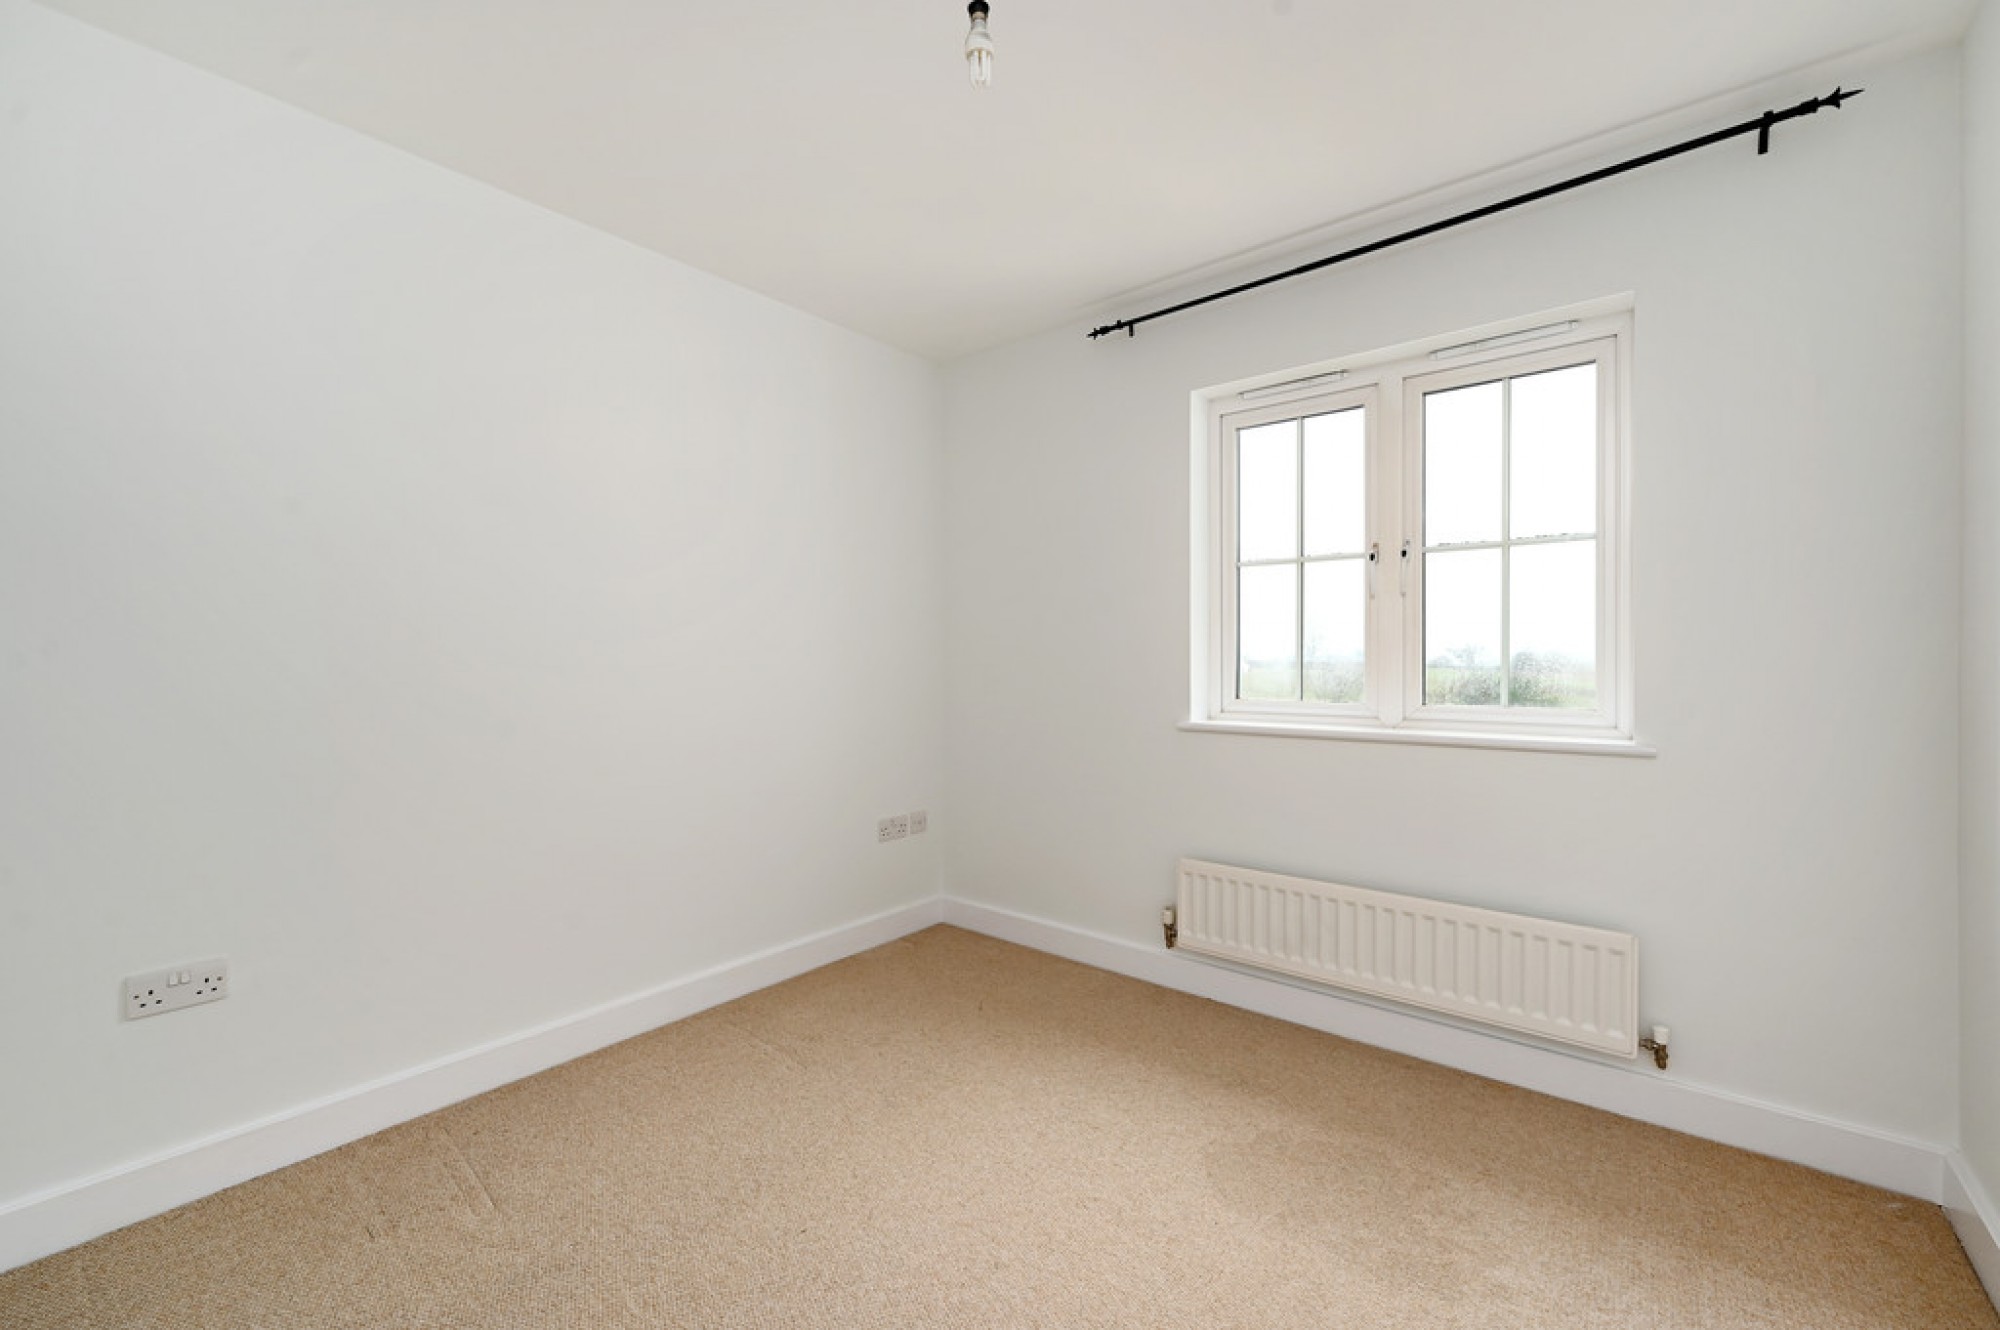 Images for Whitesand Drive, Camber, East Sussex TN31 7SJ